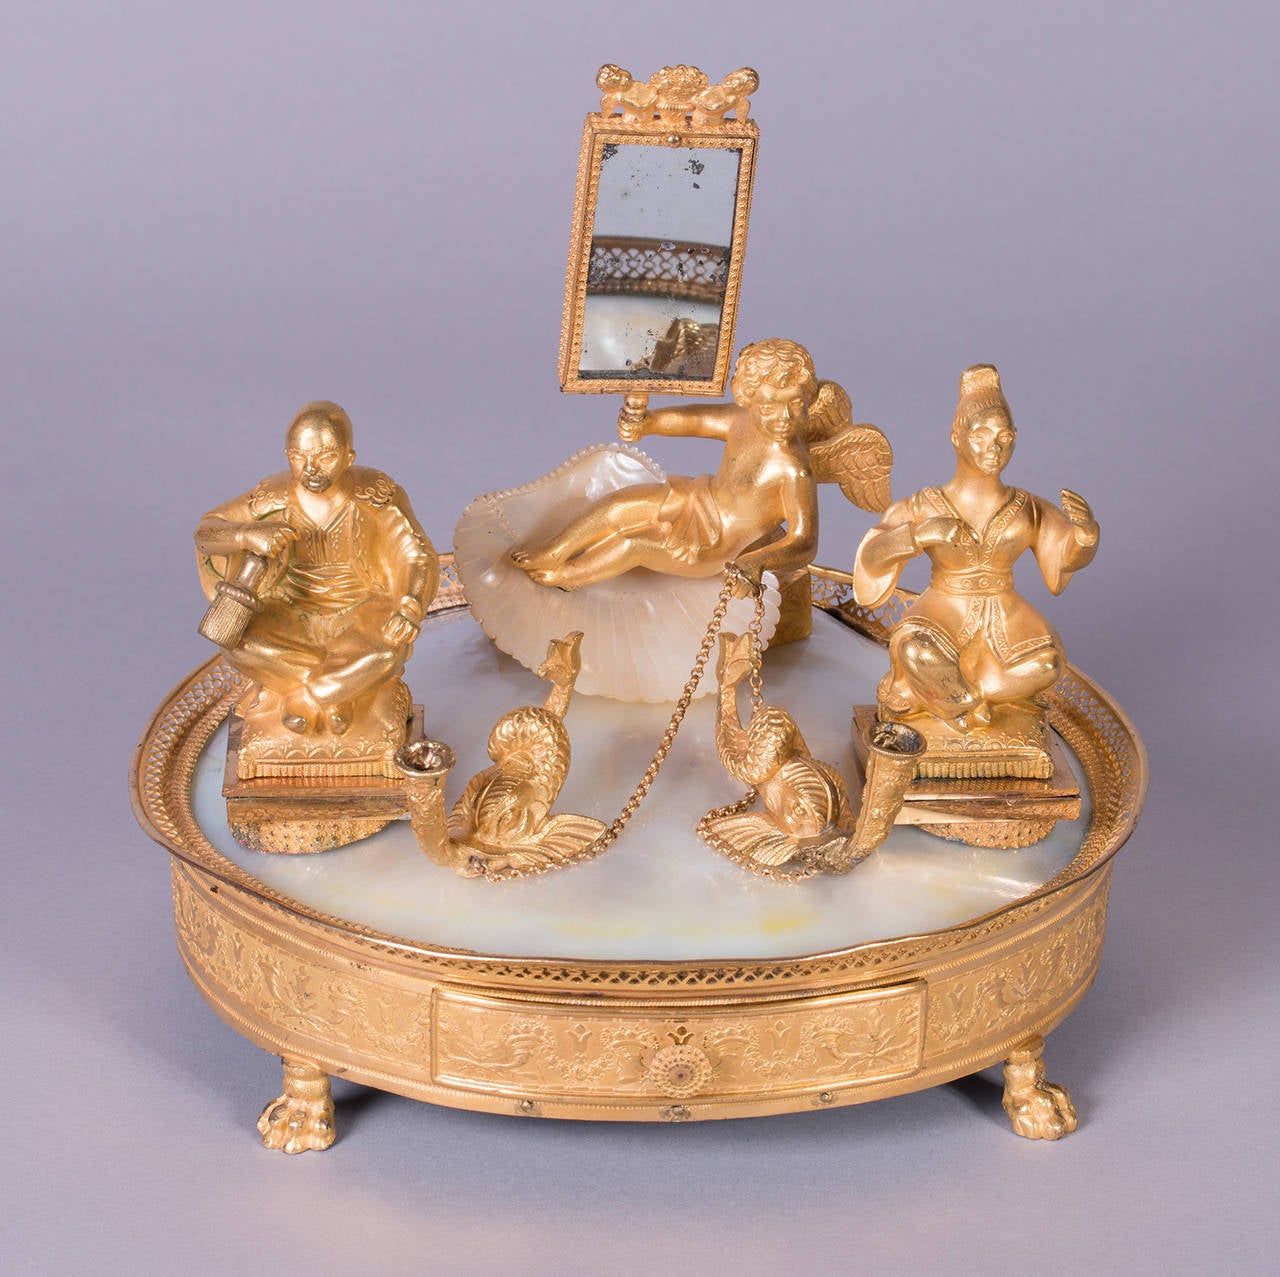 Swiss musical mechanism, signed „Aliberto [?] 33“, with two melodies (selectable), fire gilded brass with mother of pearl and a small mirror. 
Francois Alibert made musical boxes between 1800 and 1857(?) in Paris (10 rue J.J. Rousseau).